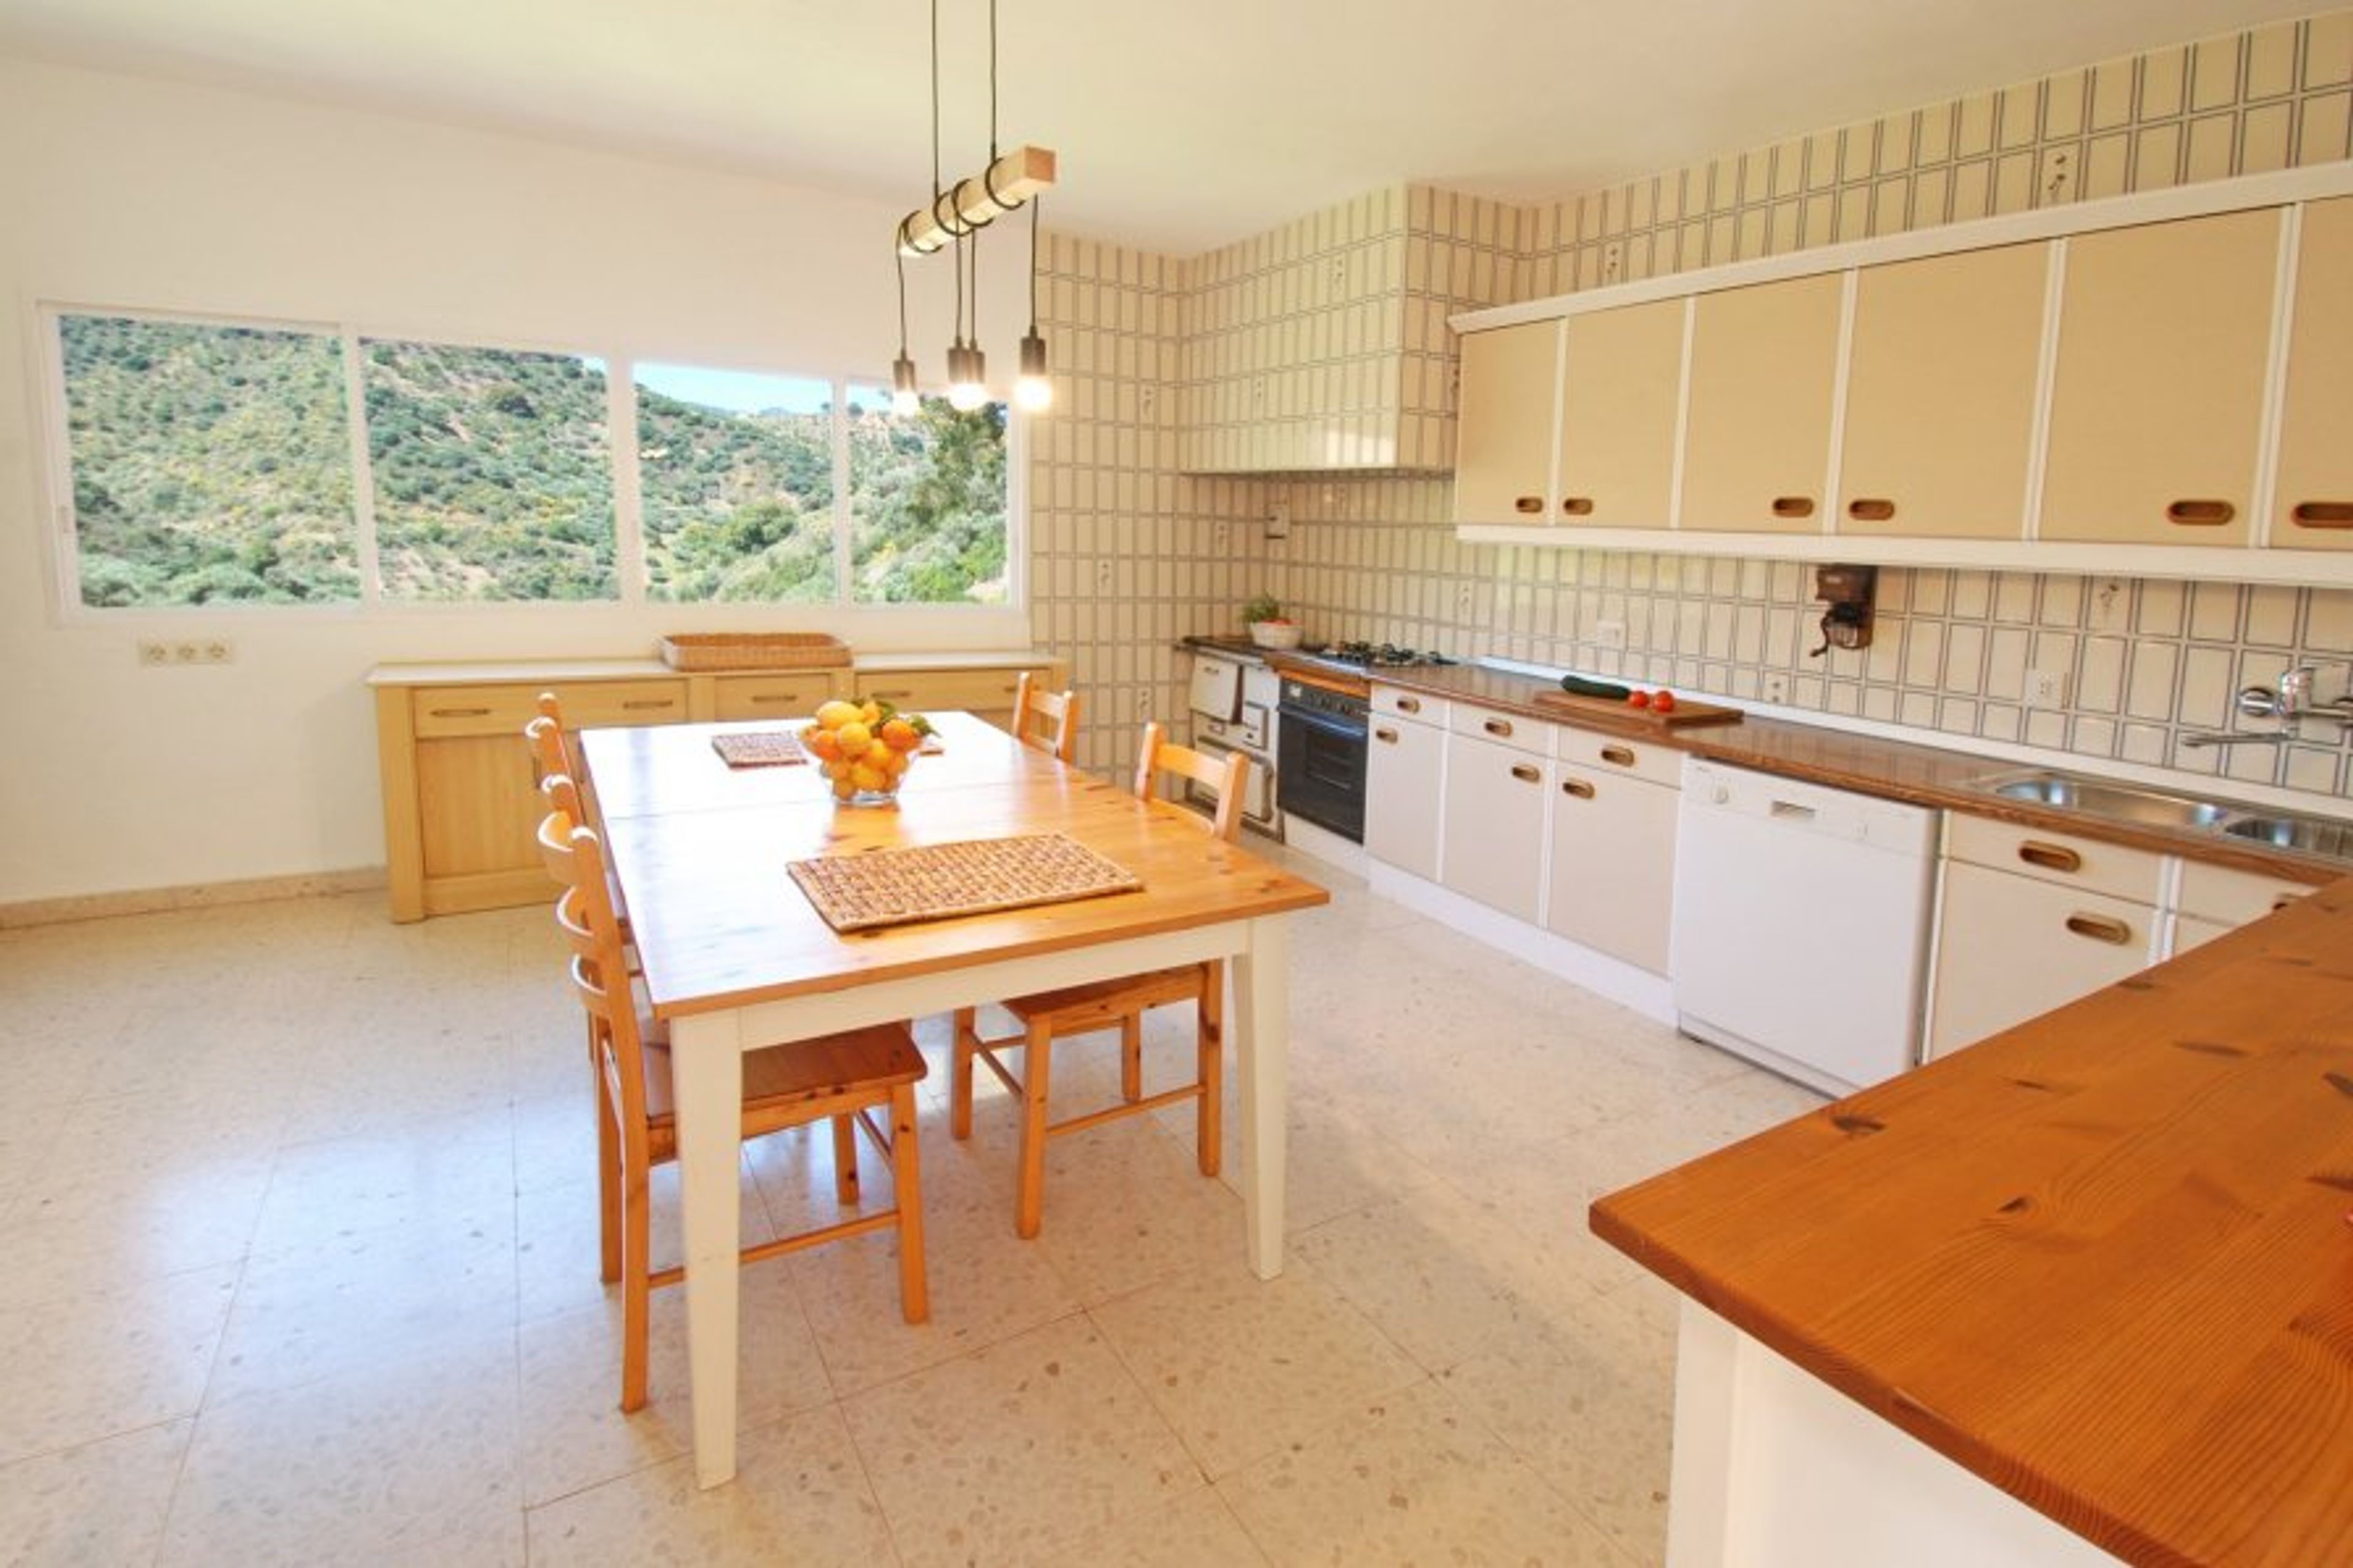 The kitchen is spacious and well equipped. 